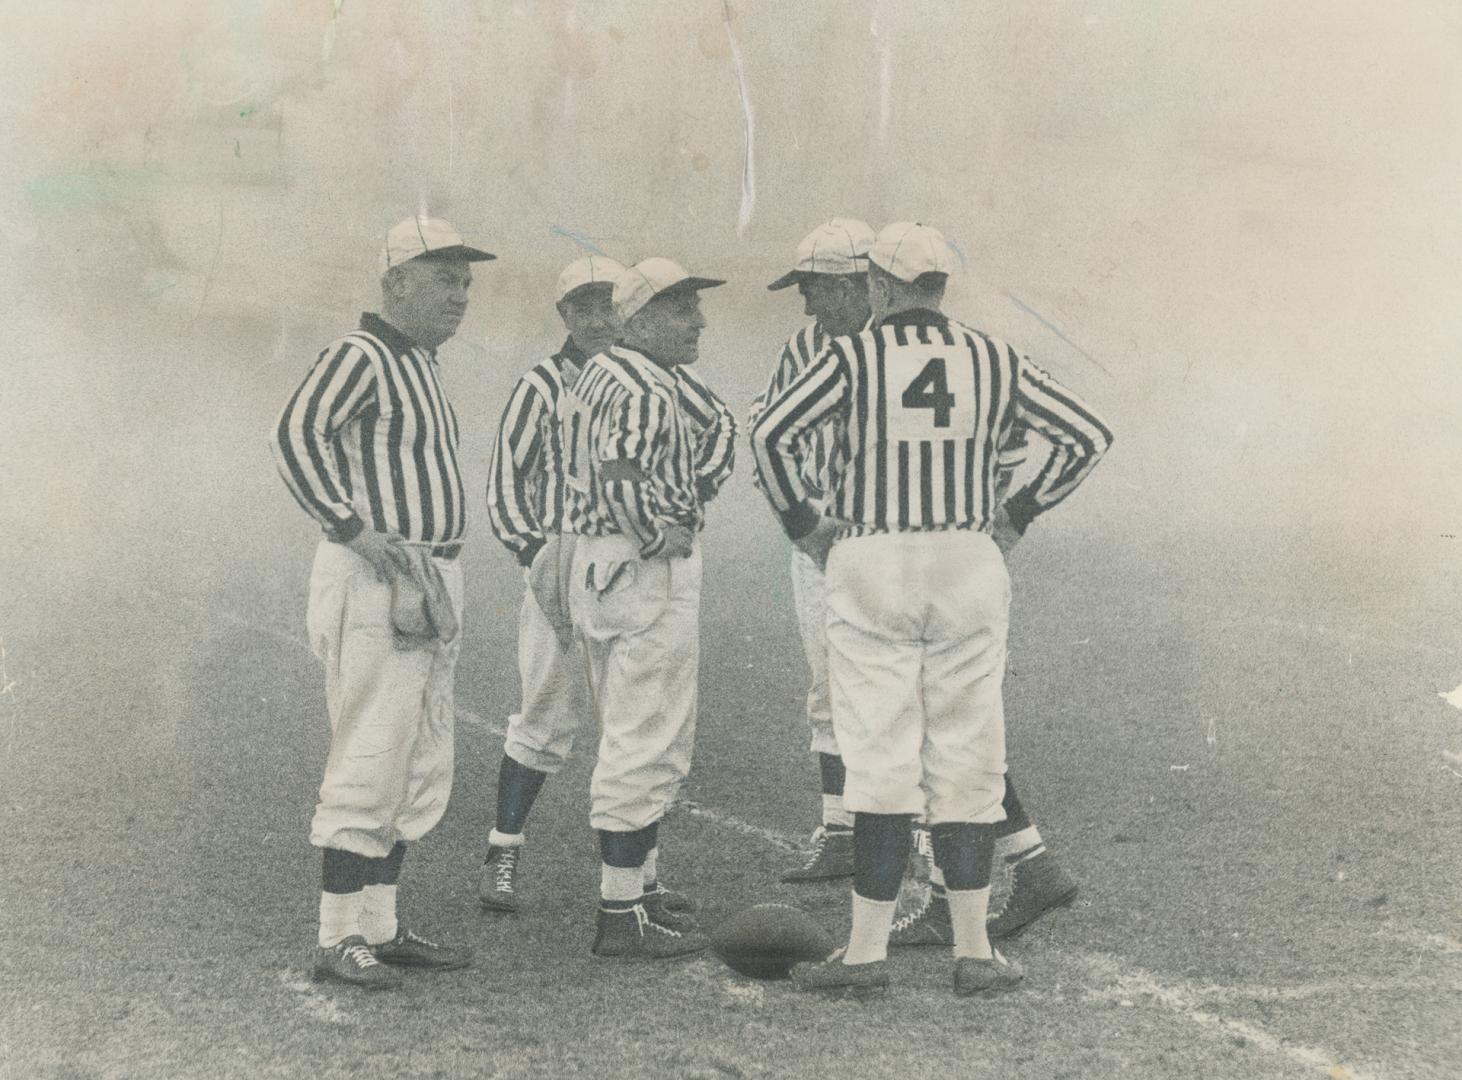 Grey Cup -- but where are the players? Game officials stand alone in the fog at the scene of the zaniest Grey Cup in history. The game was finally hal(...)